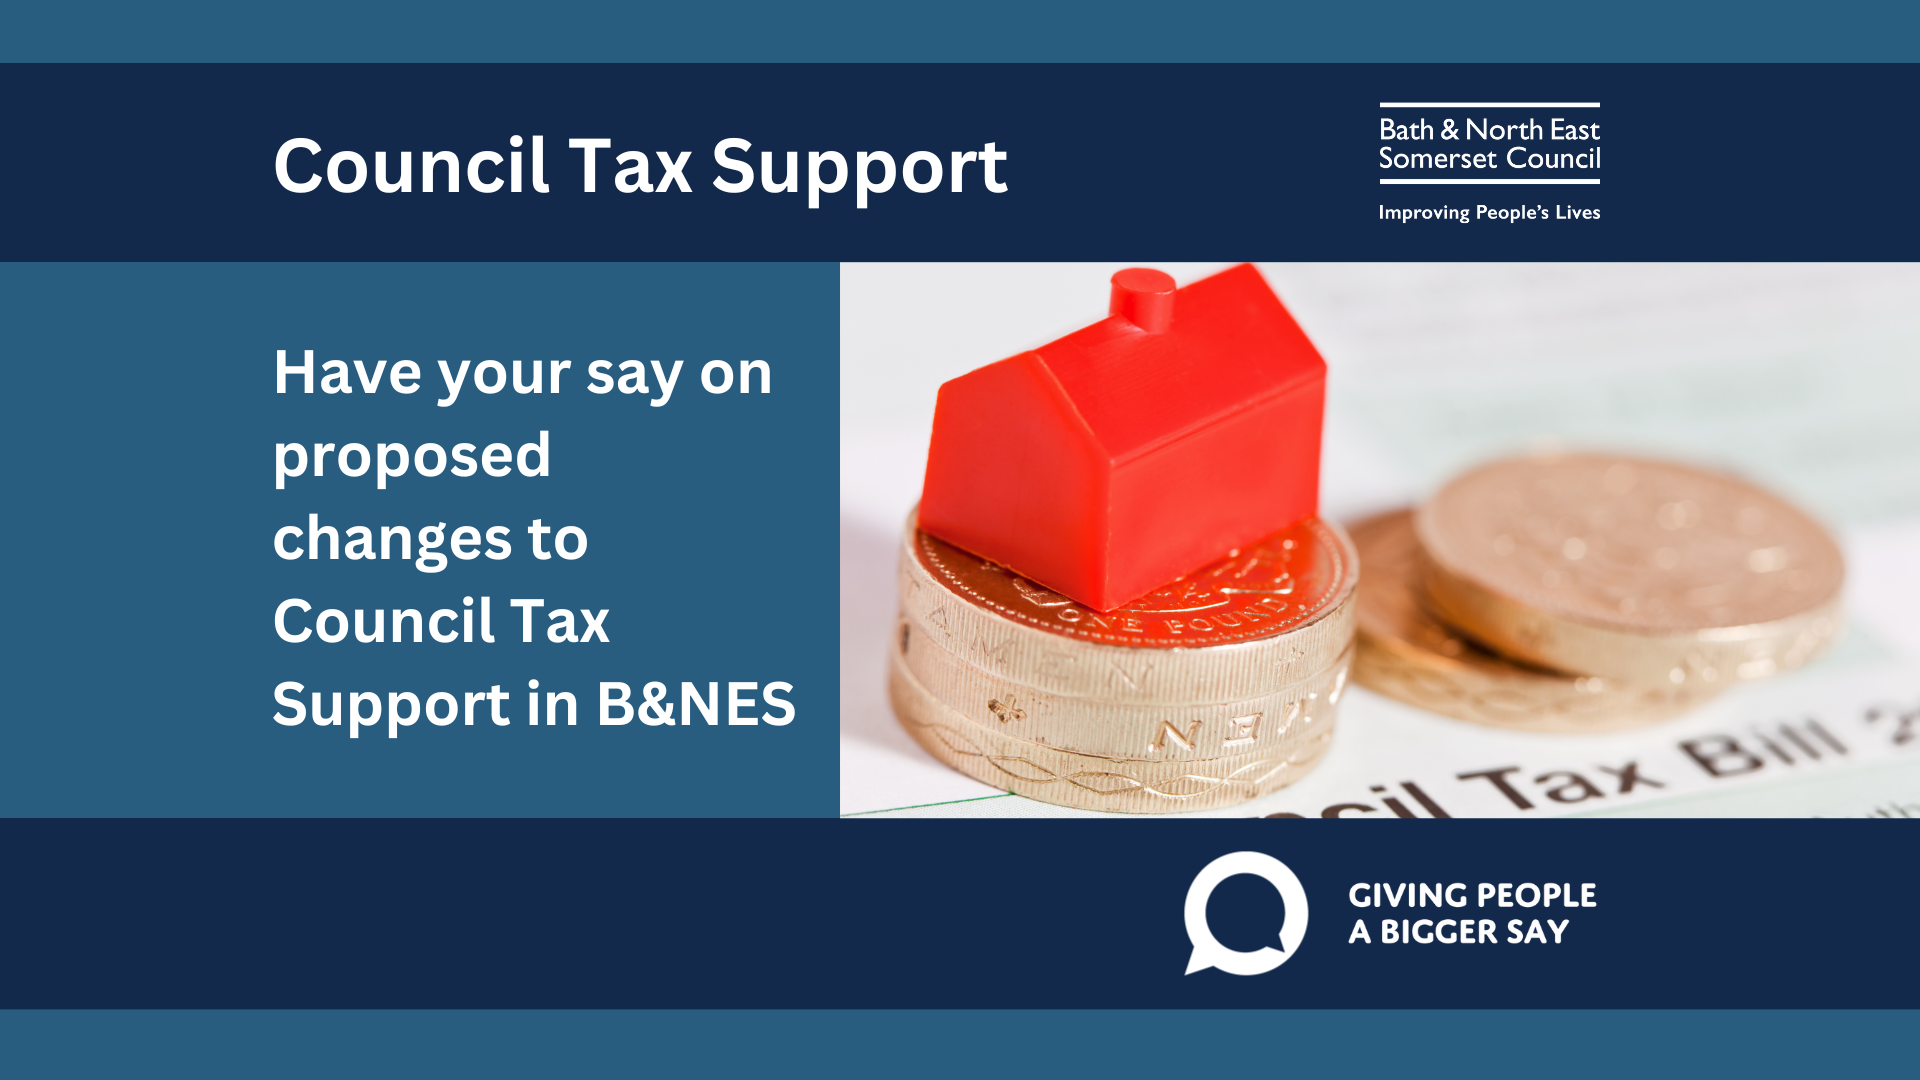 Consultation launched on proposed changes to Council Tax Support in B&NES 